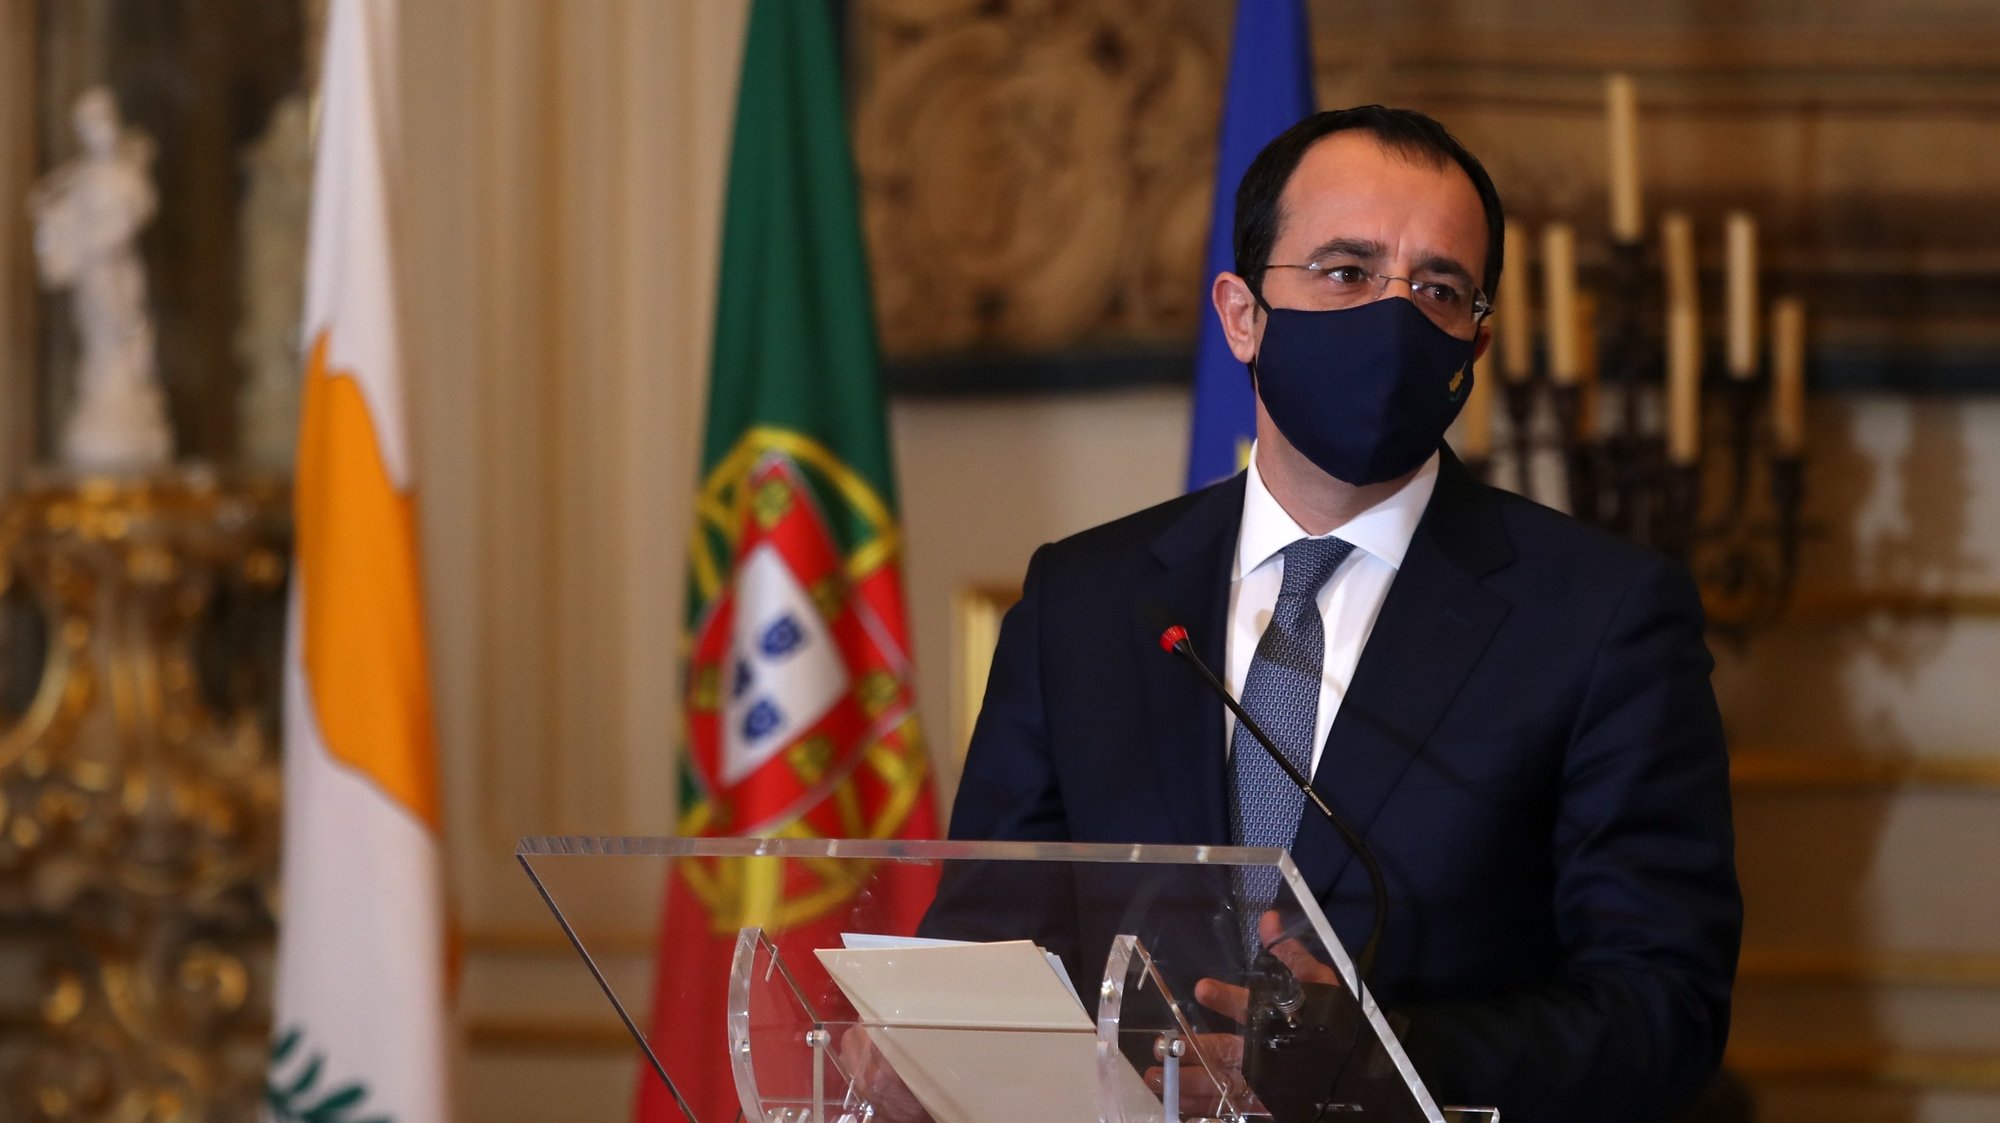 Cyprus Foreign Affairs Minister, Nikos Christodoulides, during a joint press conference with his Portuguese counterpart, Augusto Santos Silva (not pctured), after a meeting at the Portuguese Foreign Ministery in Lisbon, 6th January 2021.    MANUEL DE ALMEIDA/LUSA